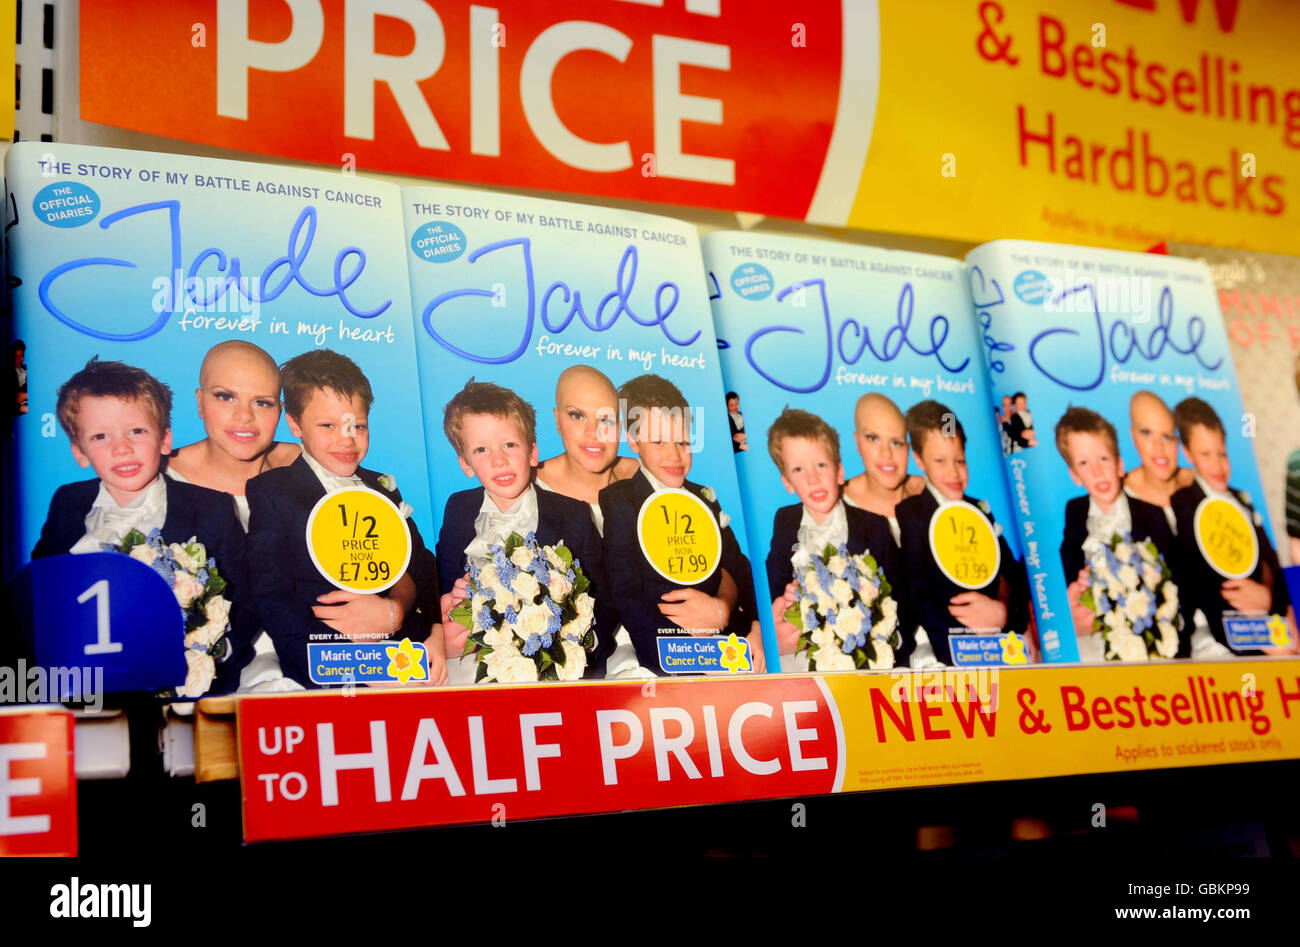 Jade Goody Book - 'Forever in My Heart'. I diari ufficiali di Jade Goody, Forever in My Heart, in vendita in WH Smith's a Lakeside, Thurrock, Essex. Foto Stock